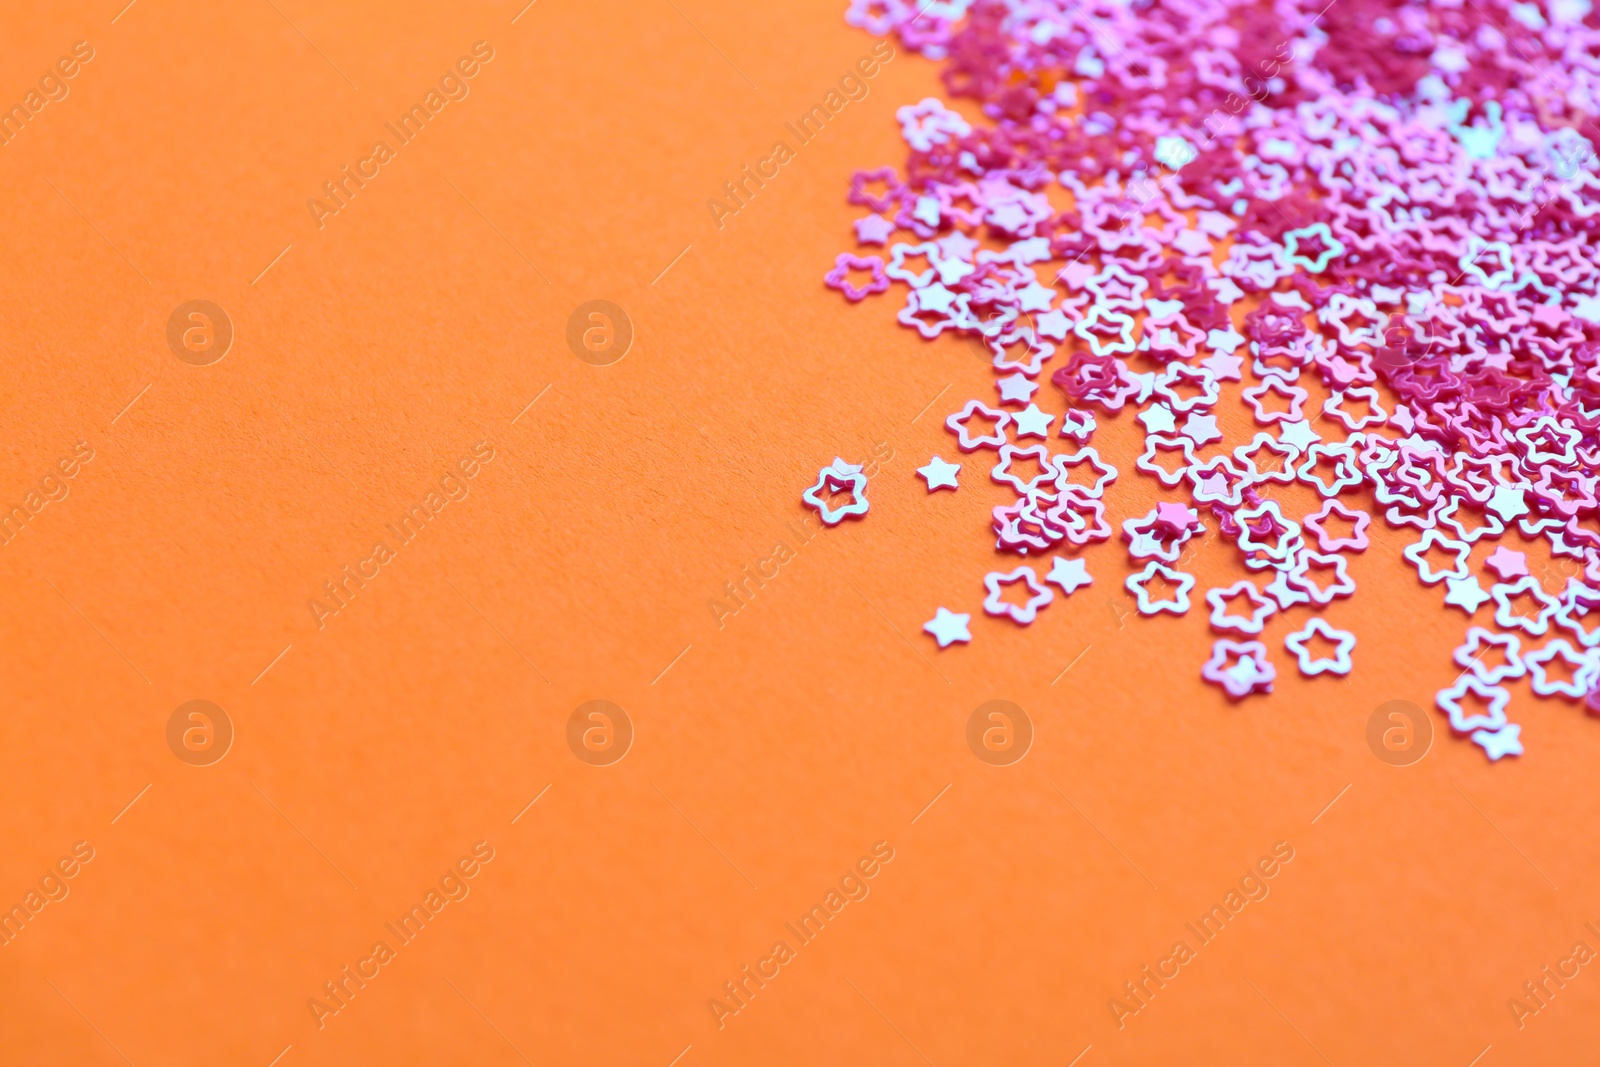 Photo of Shiny bright star shaped glitter on pale coral background. Space for text